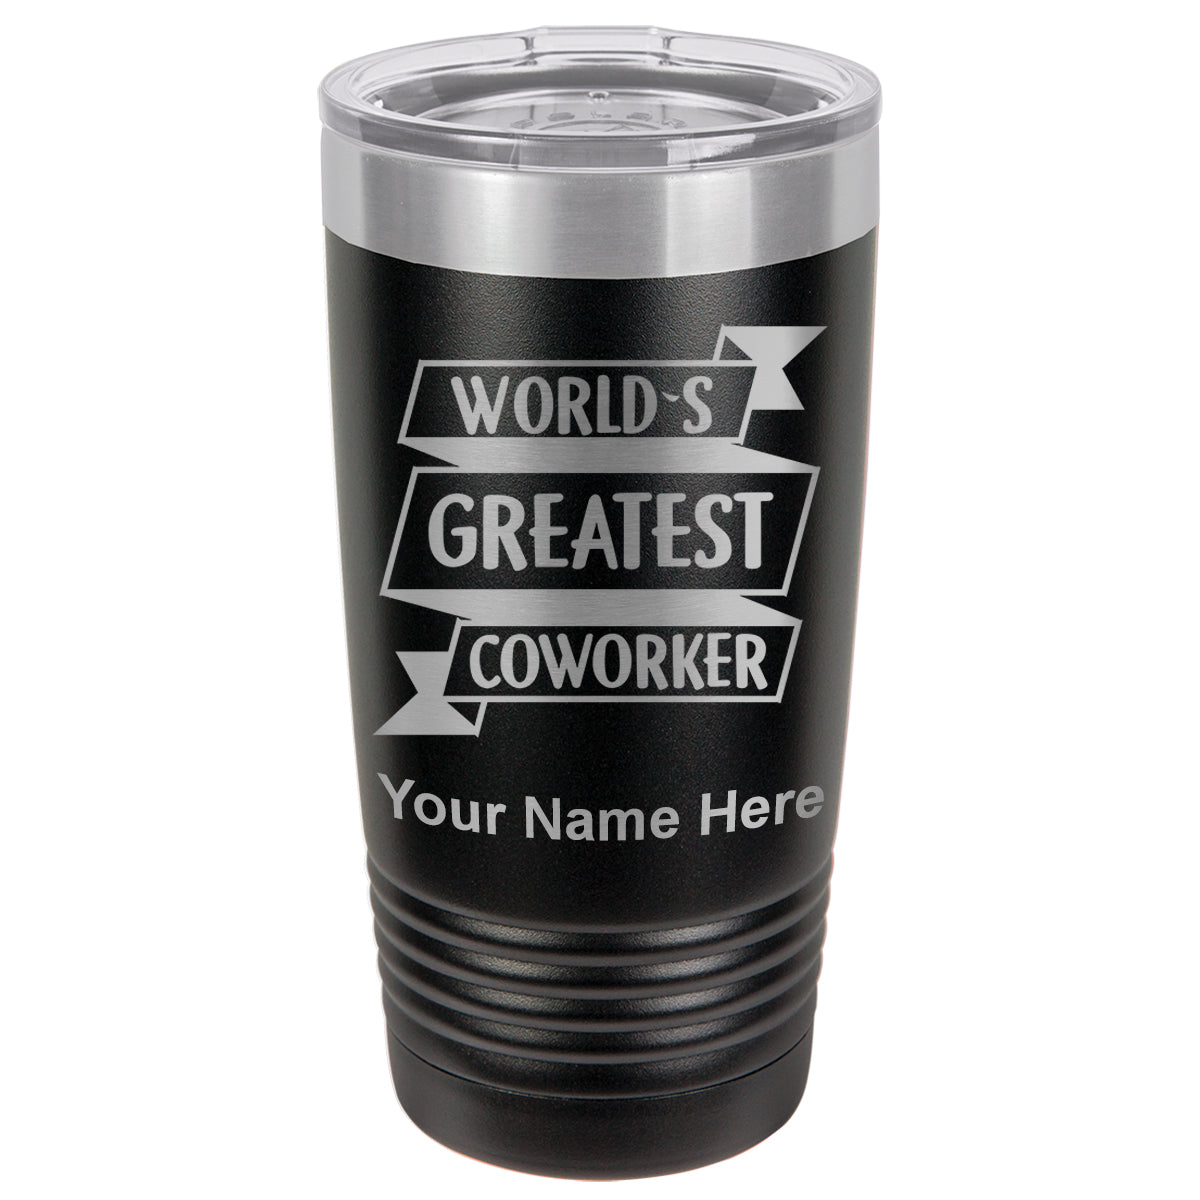 20oz Vacuum Insulated Tumbler Mug, World's Greatest Coworker, Personalized Engraving Included